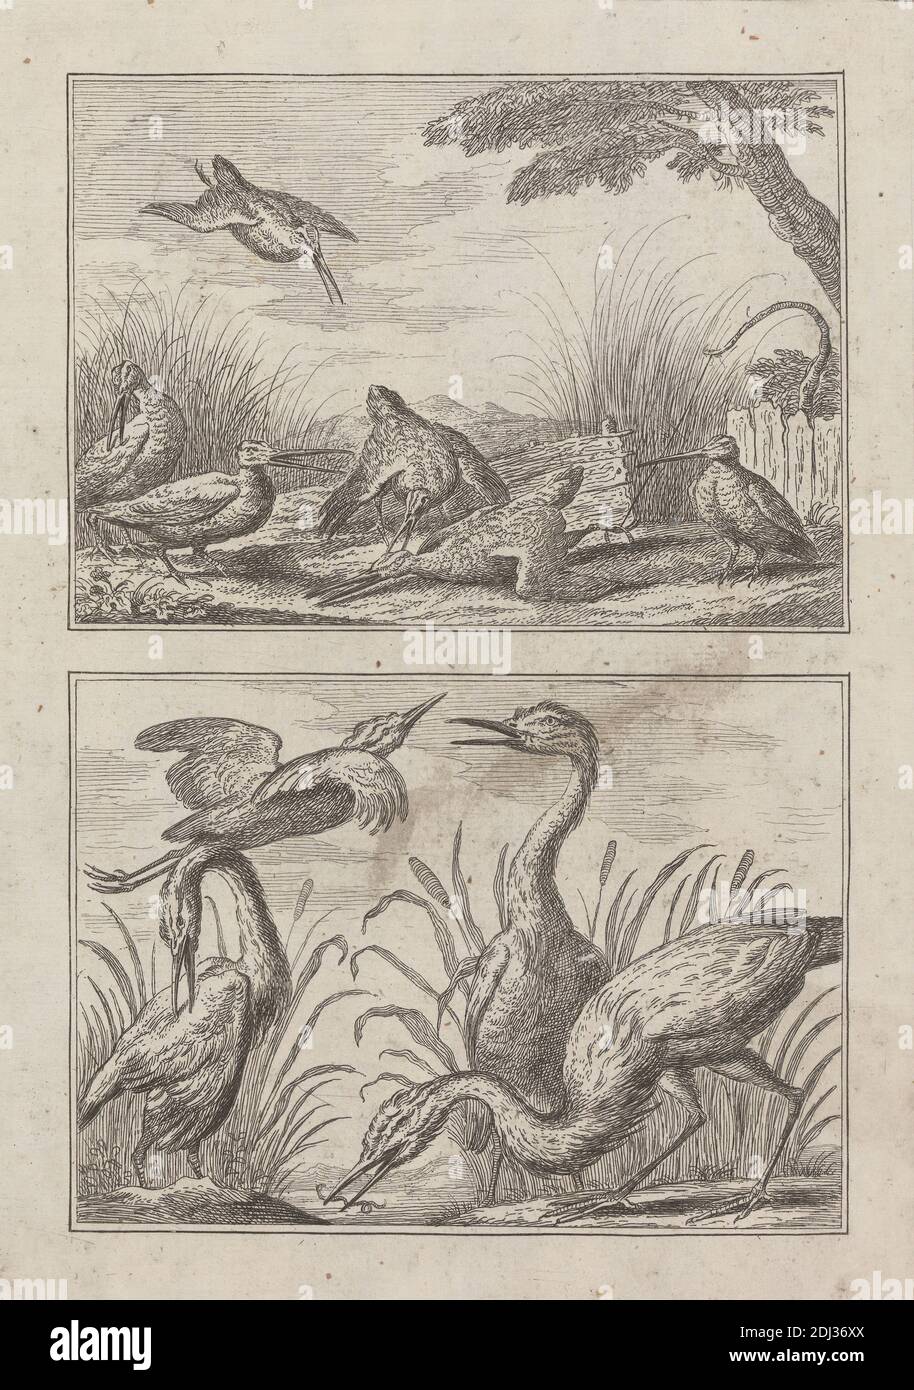 Six Snipe and four herons on two plates on one for 'A New Drawing Book..of various kinds of birds, Drawn from the Life by Francis Barlow', 1731 (1 of 9), Print made by George Bickham, 1683/4–1758, British, after Francis Barlow, ca. 1626–1704, British, Published by Henry Overton, 1675/6–1751, British, 1731, Etching on medium, smooth, cream laid paper, Sheet: 11 5/16 x 7 1/4 inches (28.8 x 18.4 cm), Plate: 8 7/16 x 6 1/8 inches (21.5 x 15.5 cm), Image: 3 7/16 x 4 15/16 inches (8.8 x 12.5 cm), and Image: 3 7/16 x 4 15/16 inches (8.8 x 12.5 cm), animal art, birds, concern, earthworm, flying Stock Photo